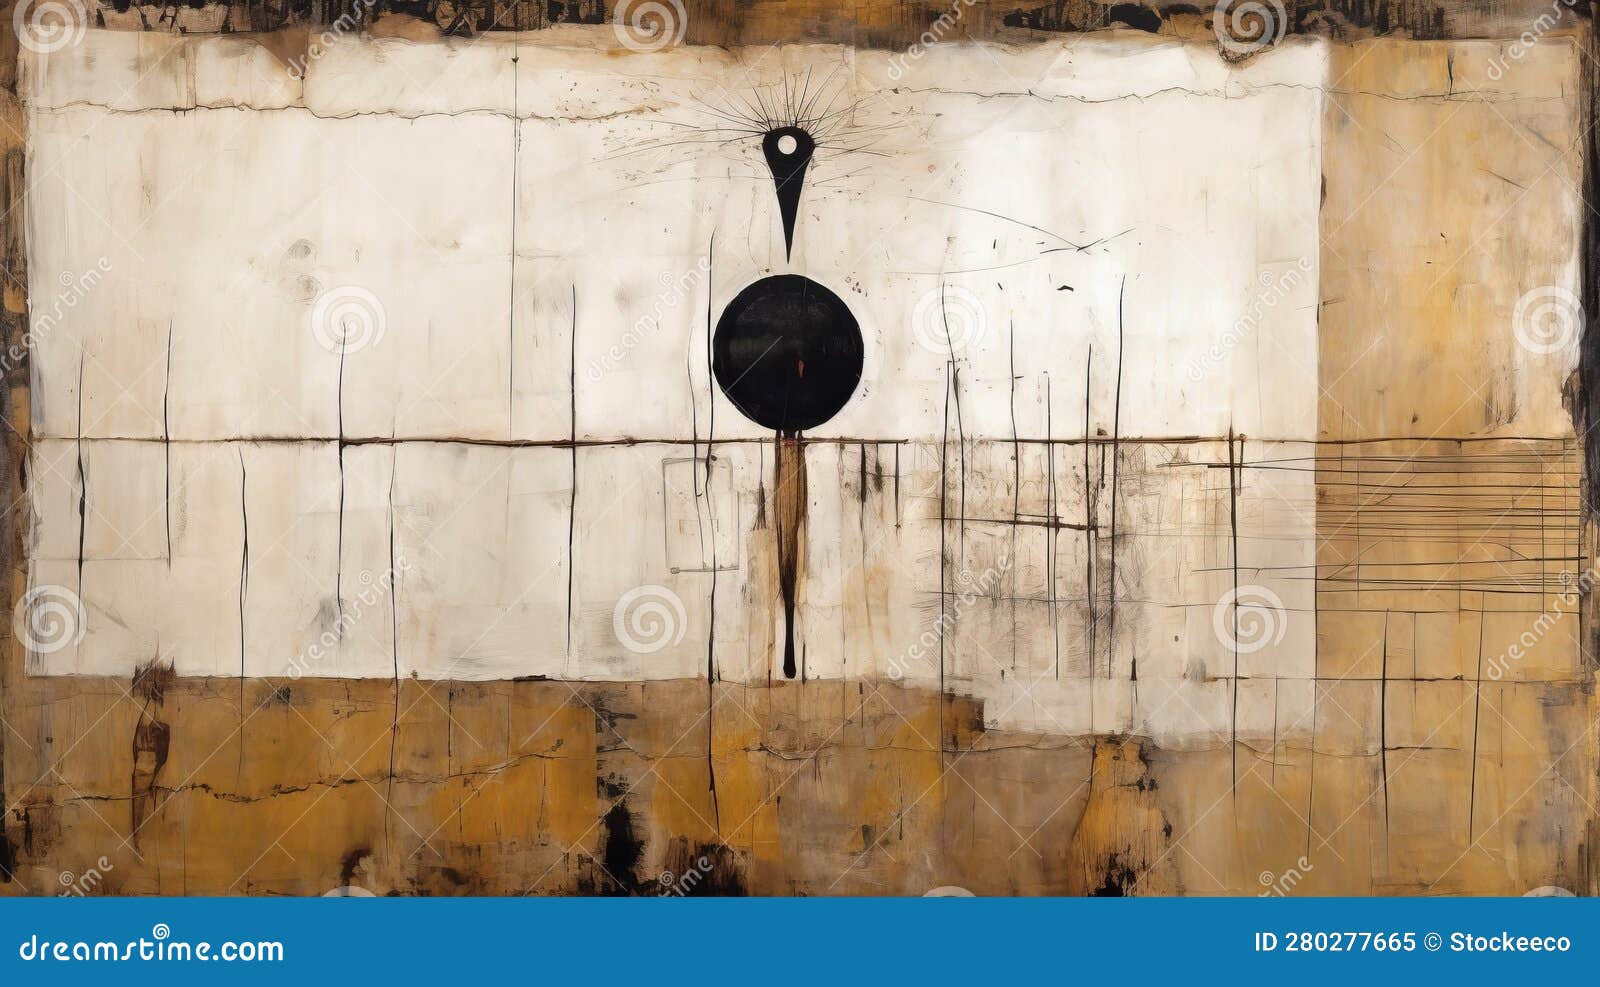 abstract painting of black object and white paper in gabriel pacheco style